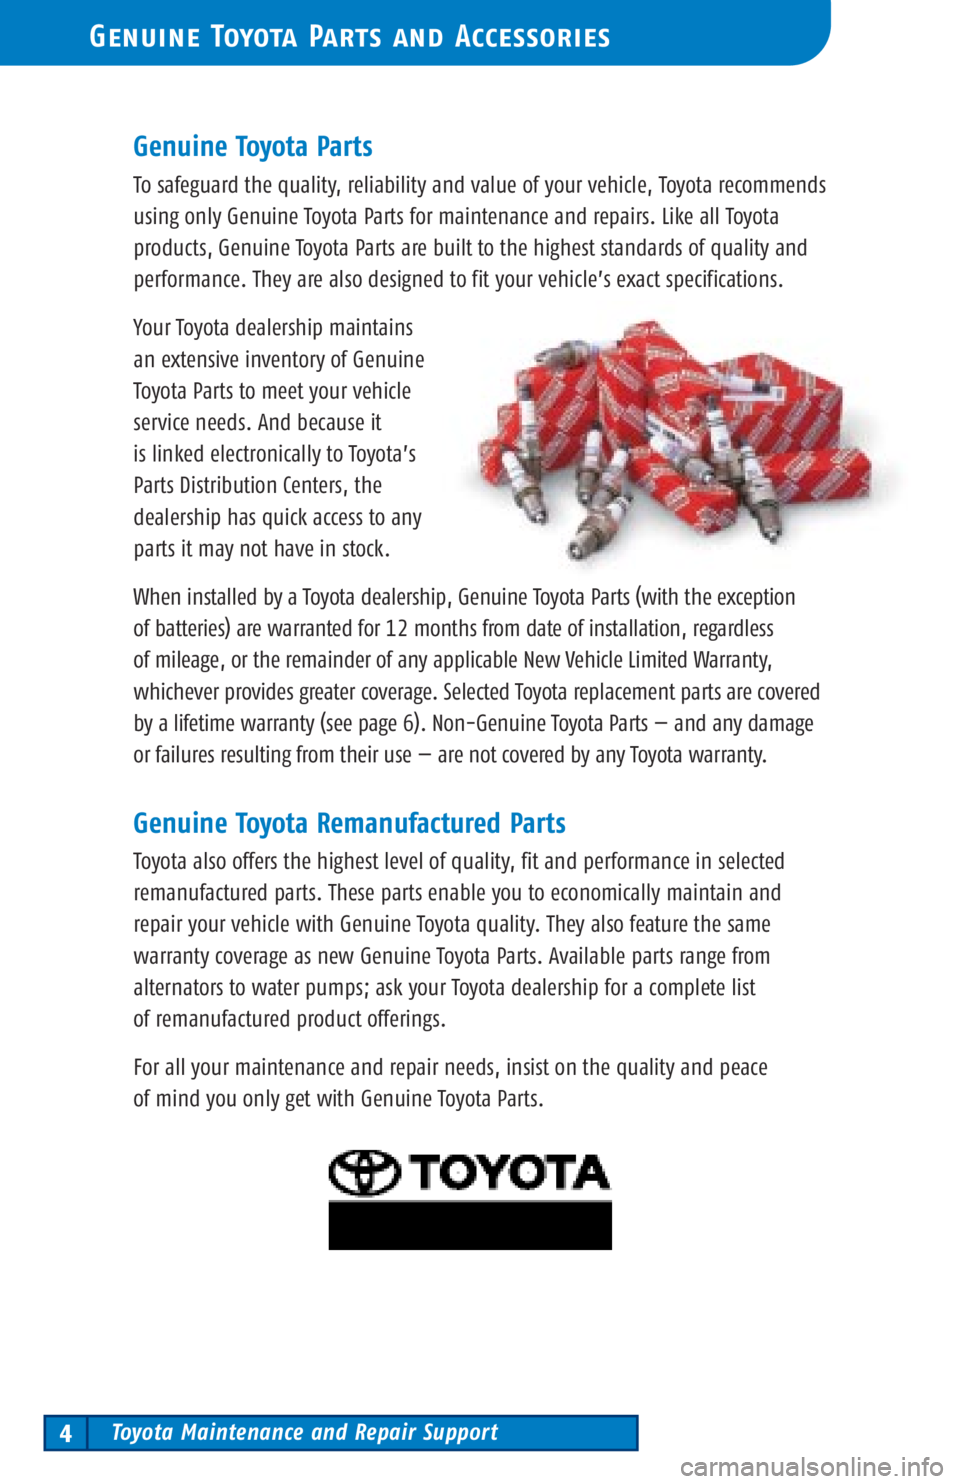 TOYOTA TACOMA 2002  Warranties & Maintenance Guides (in English) Toyota Maintenance and Repair Support4
Genuine Toyota Parts and Accessories
Genuine Toyota Parts
To safeguard the quality, reliability and value of your vehicle, Toyota recommends
using only Genuine T